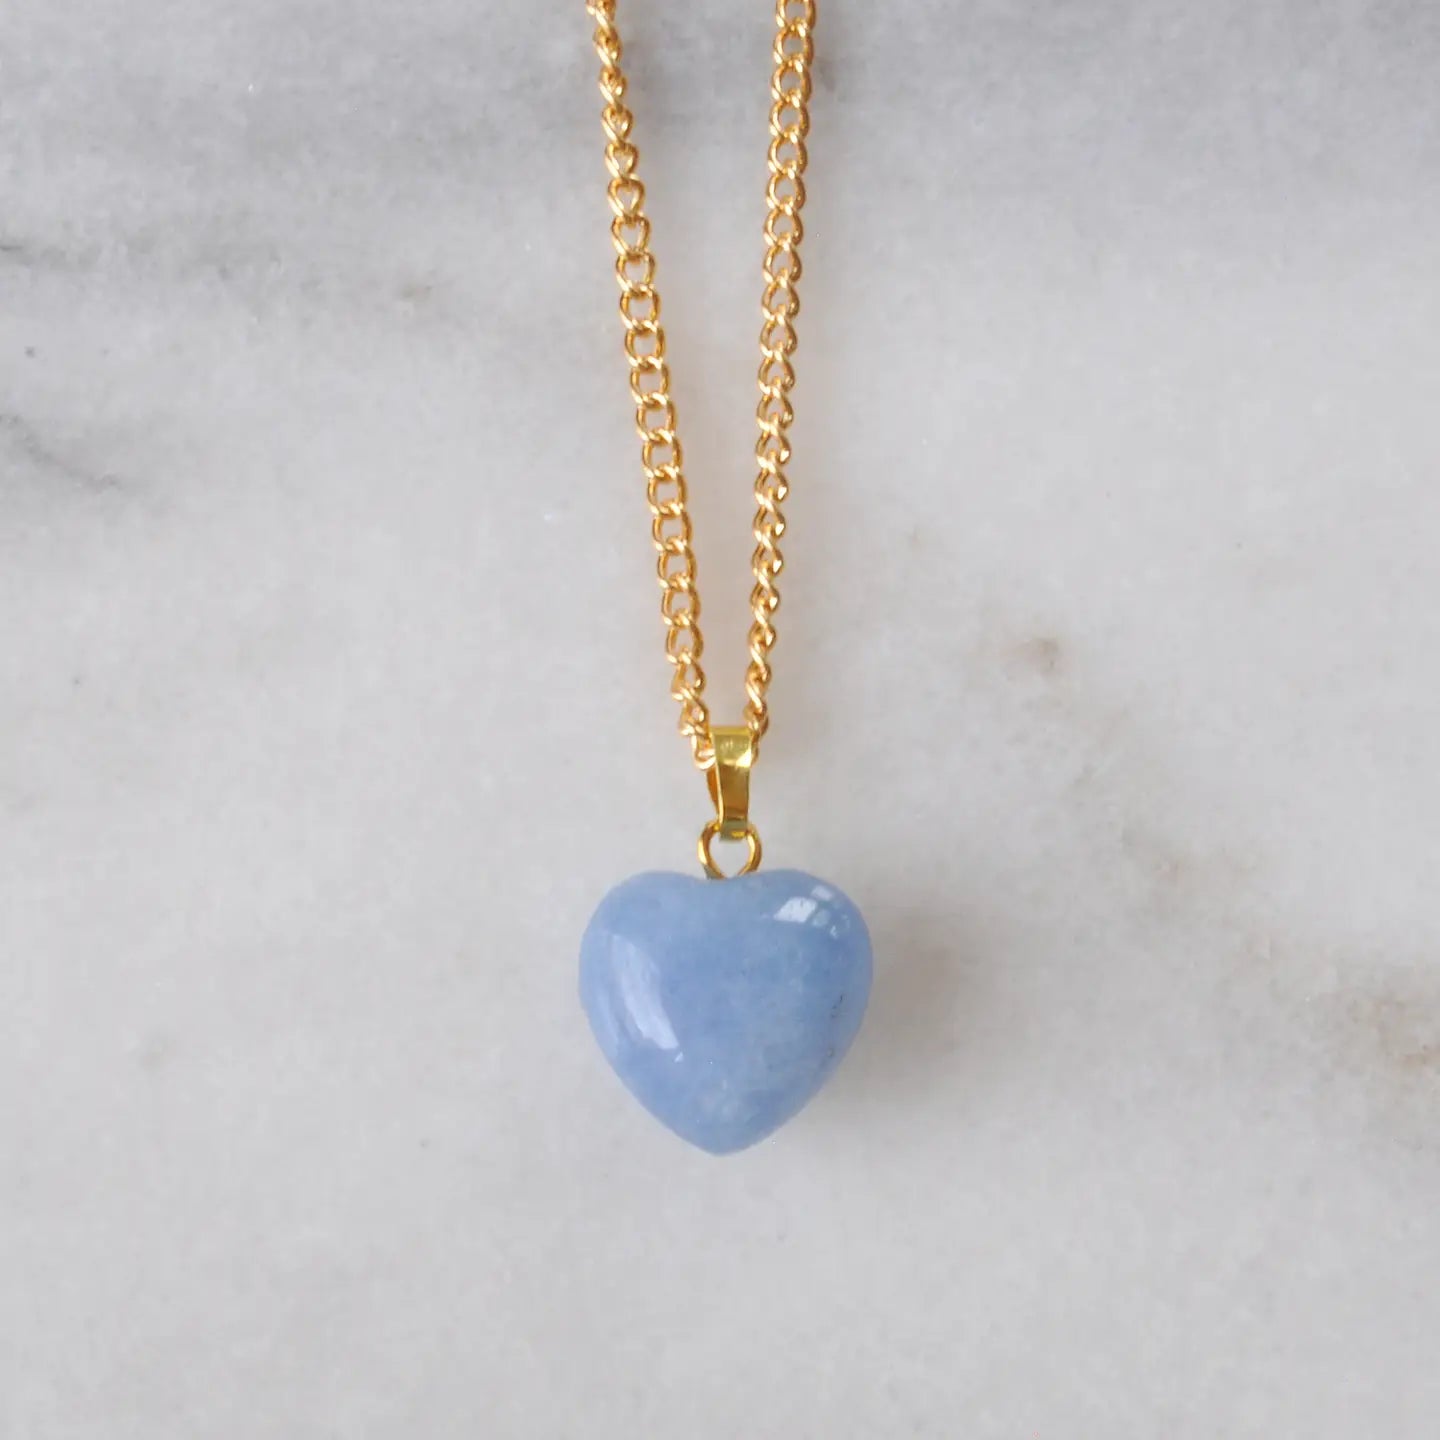 Libby & Smee Crystal Gemstone Heart Necklace